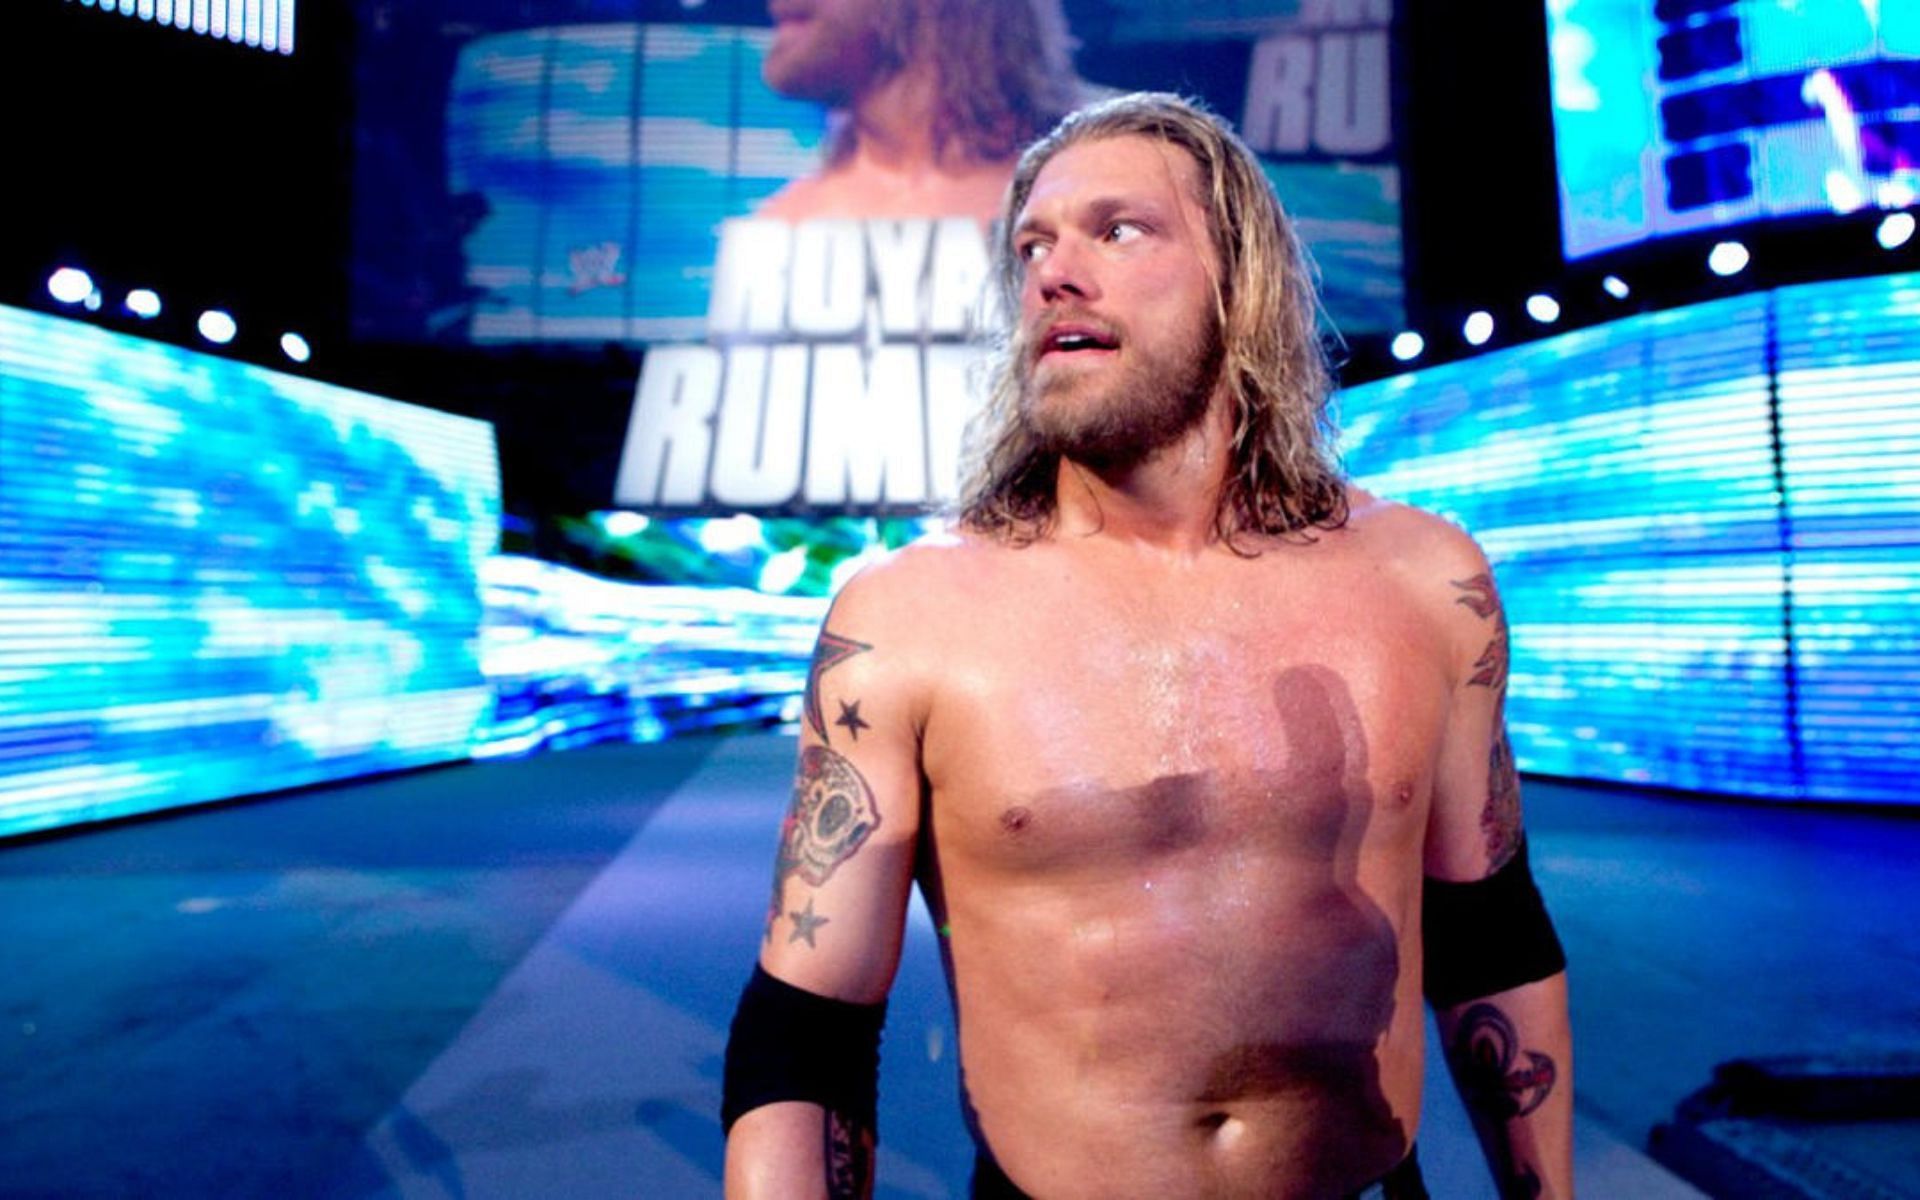 The Rated-R Superstar made his return to the Rumble in 2010!